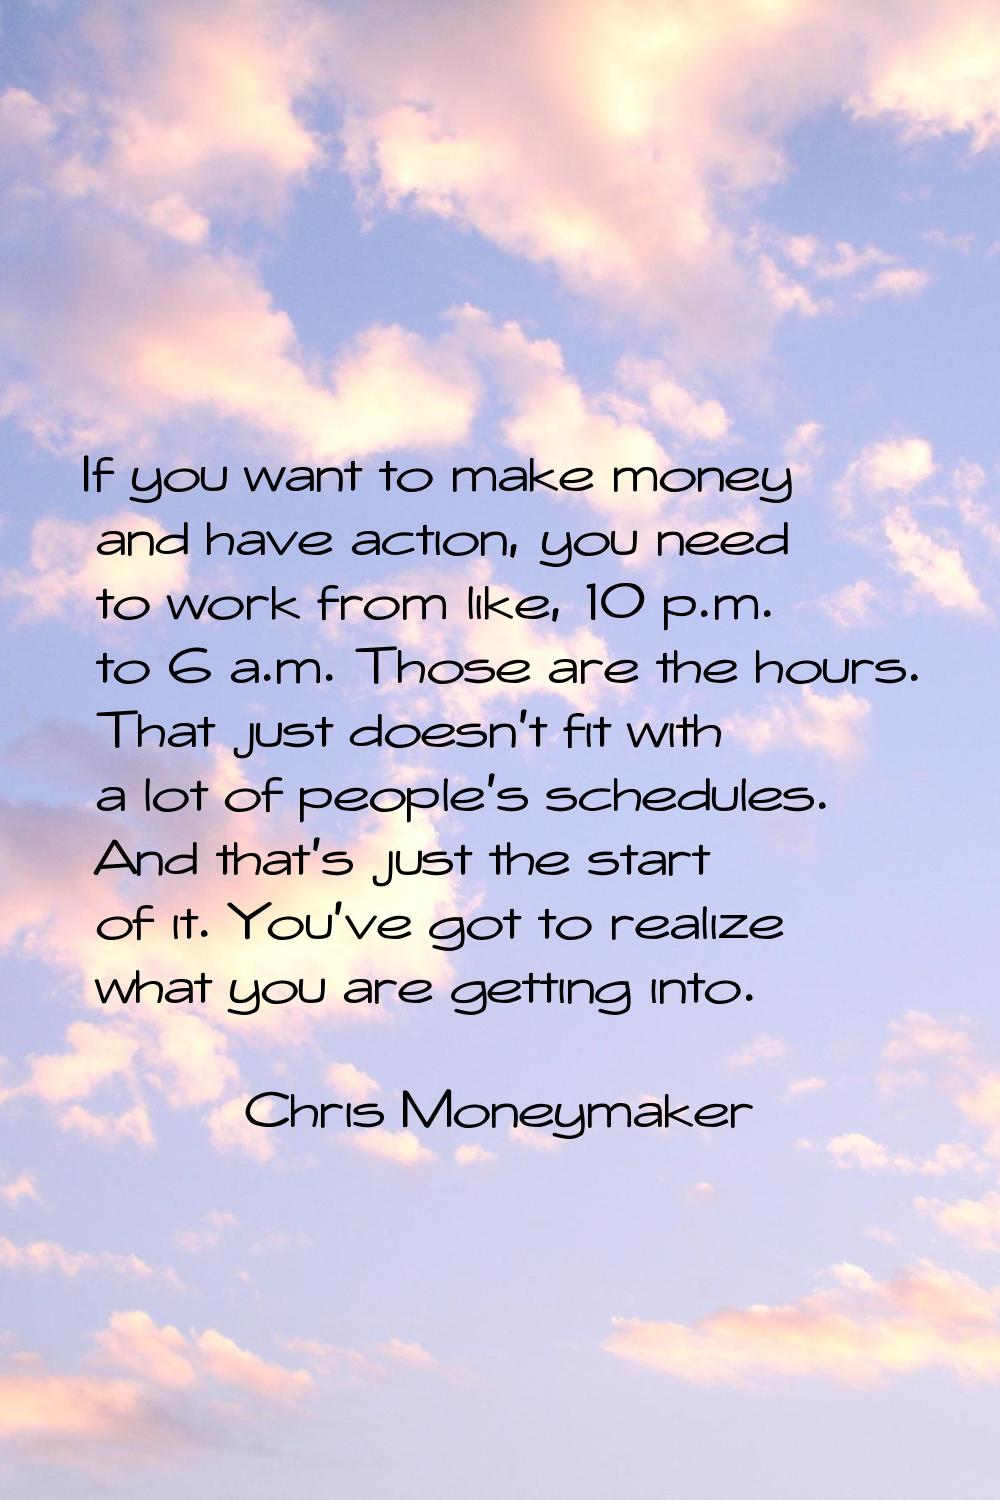 If you want to make money and have action, you need to work from like, 10 p.m. to 6 a.m. Those are 